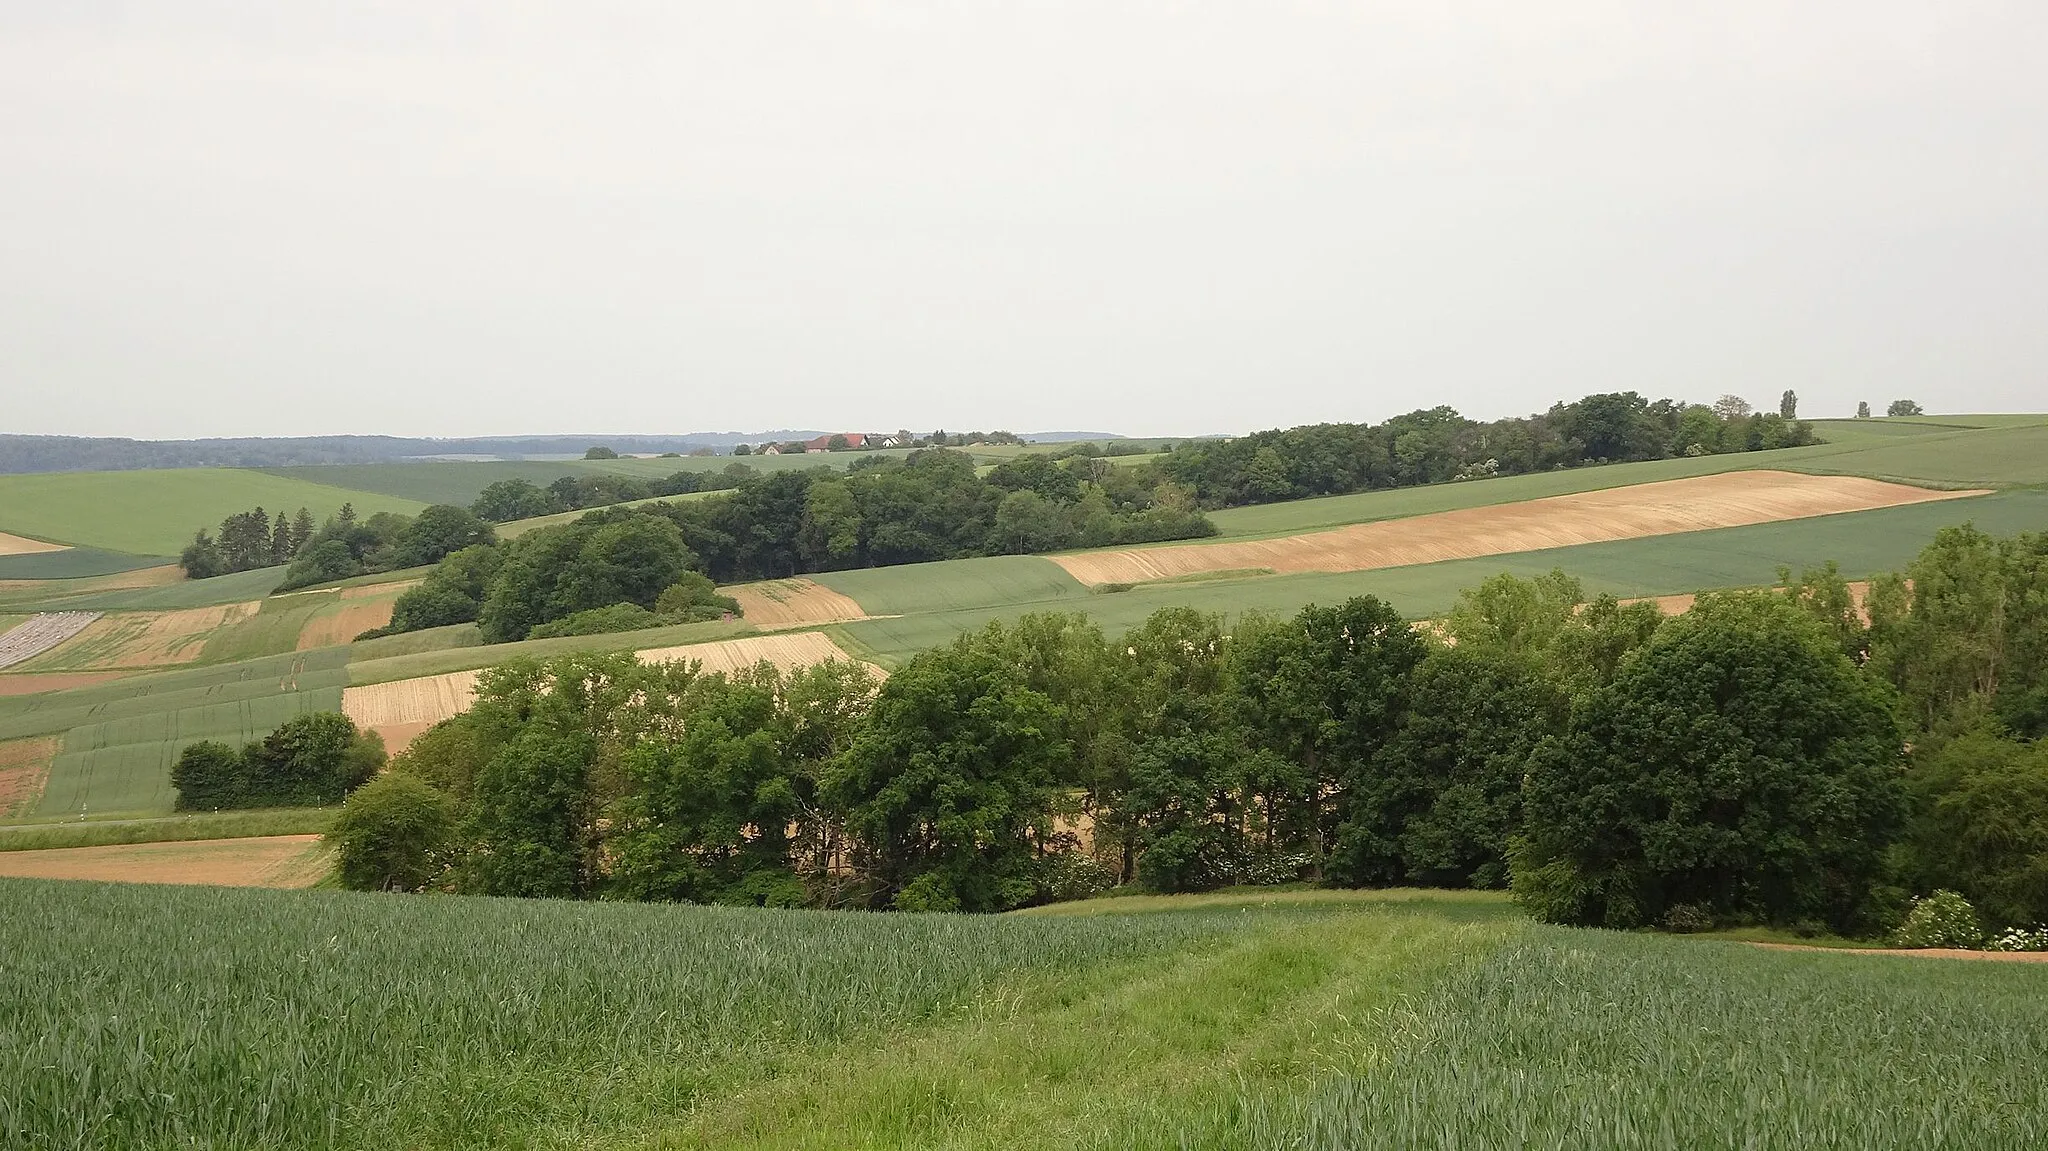 Photo showing: Natural monuments "Hohl Halde" (in front) and "Hohl Griesbusch" (behind) (Otzberg, Landkreis Darmstadt-Dieburg, Hesse, Germany). In the left background the natural monument "Hohl Mordkaute" and the hamlet Hundertmorgen.